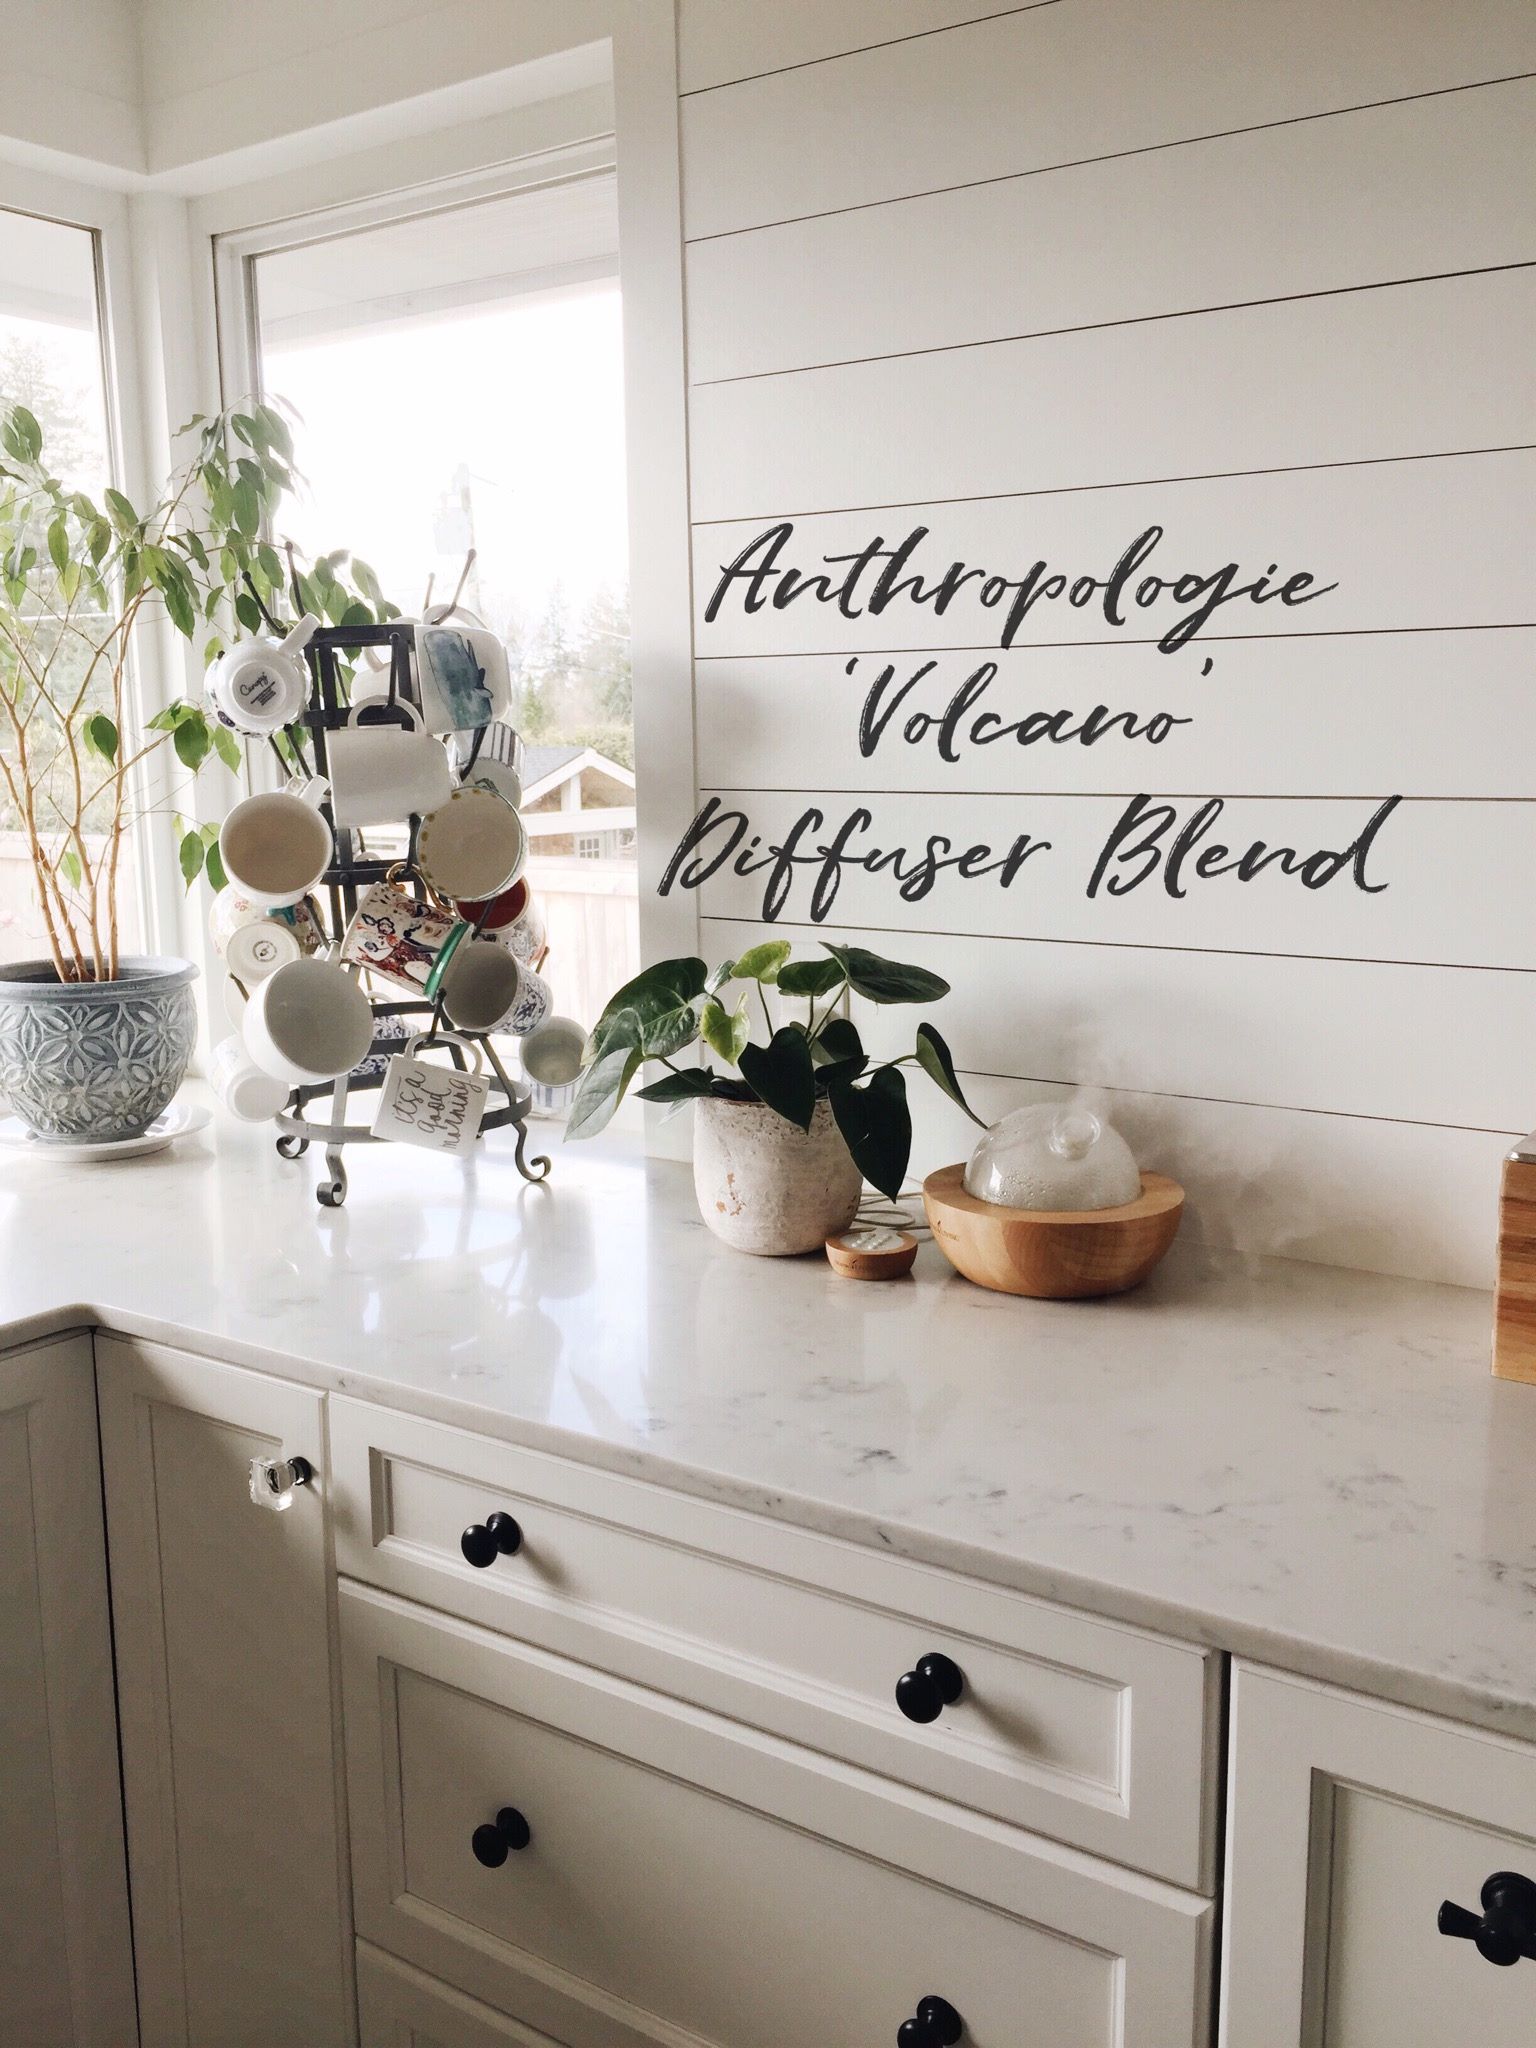 How to Make Your House Smell Like Anthropologie